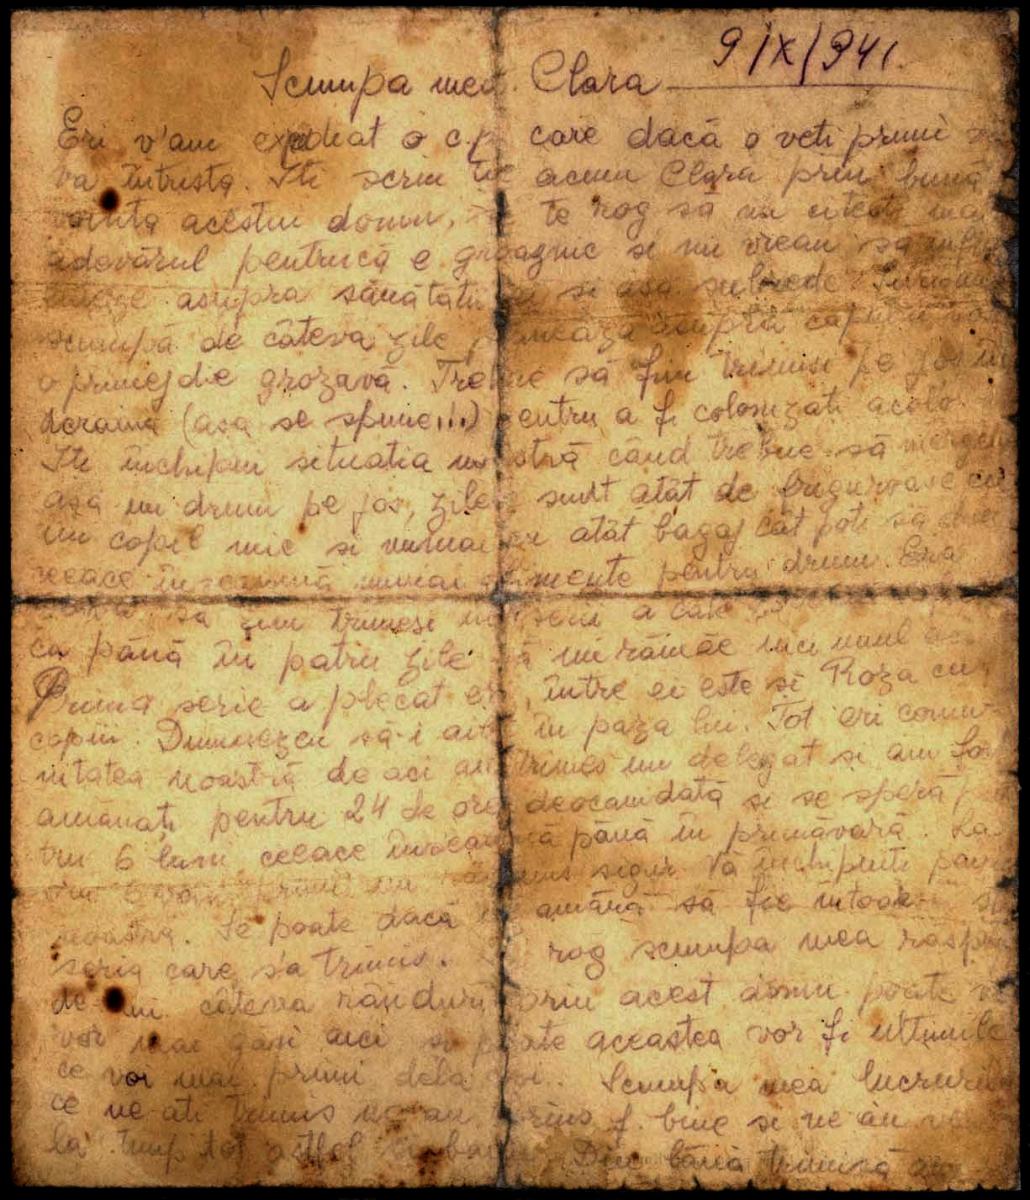 The letter of Ida Goldish to her sister Clara